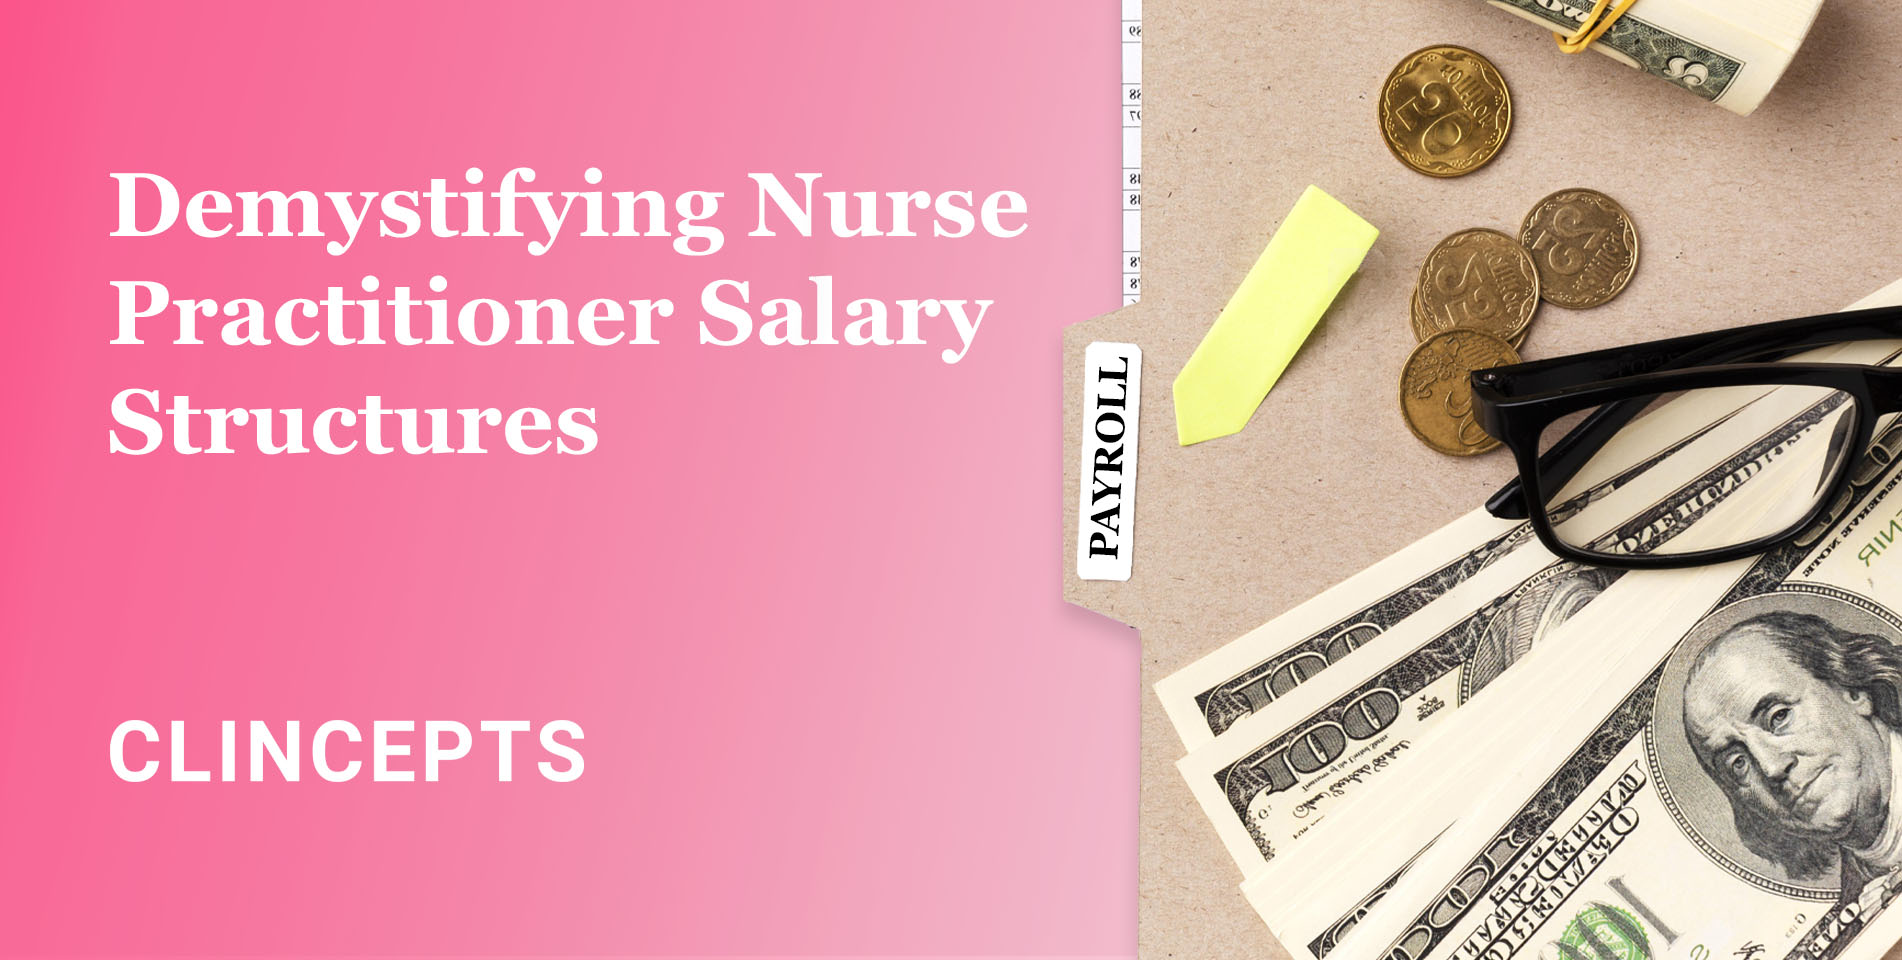 Demystifying Nurse Practitioner Salary Structures